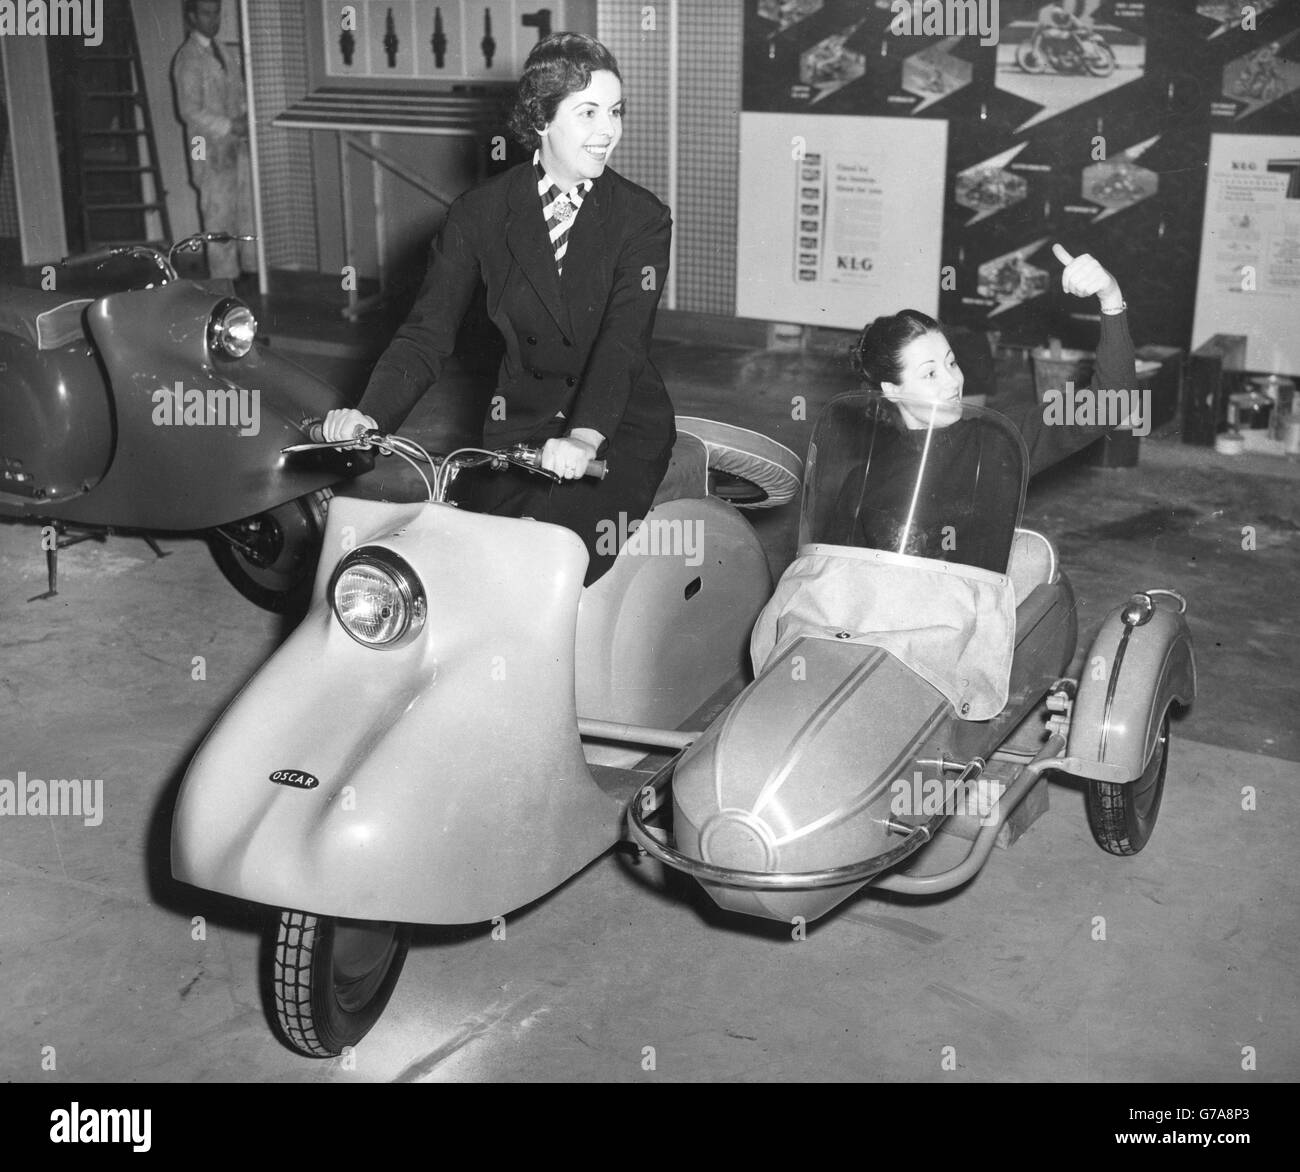 Smoothly streamlined and with a sidecar to match is the 197cc Oscar, a new British motor-scooter, which is being exhibited in Britain for the first at the Cycle and Motorcycle Show, opening at Earls Court, London. Trying out the combination at Earls Court are Jean Street (l) and Anne Long. The machine, powered by a two-stroke Villiers engine, can carry two people on a duel seat and also has space for two suitcases. *Scan from print. Hi-res version available on request. Stock Photo